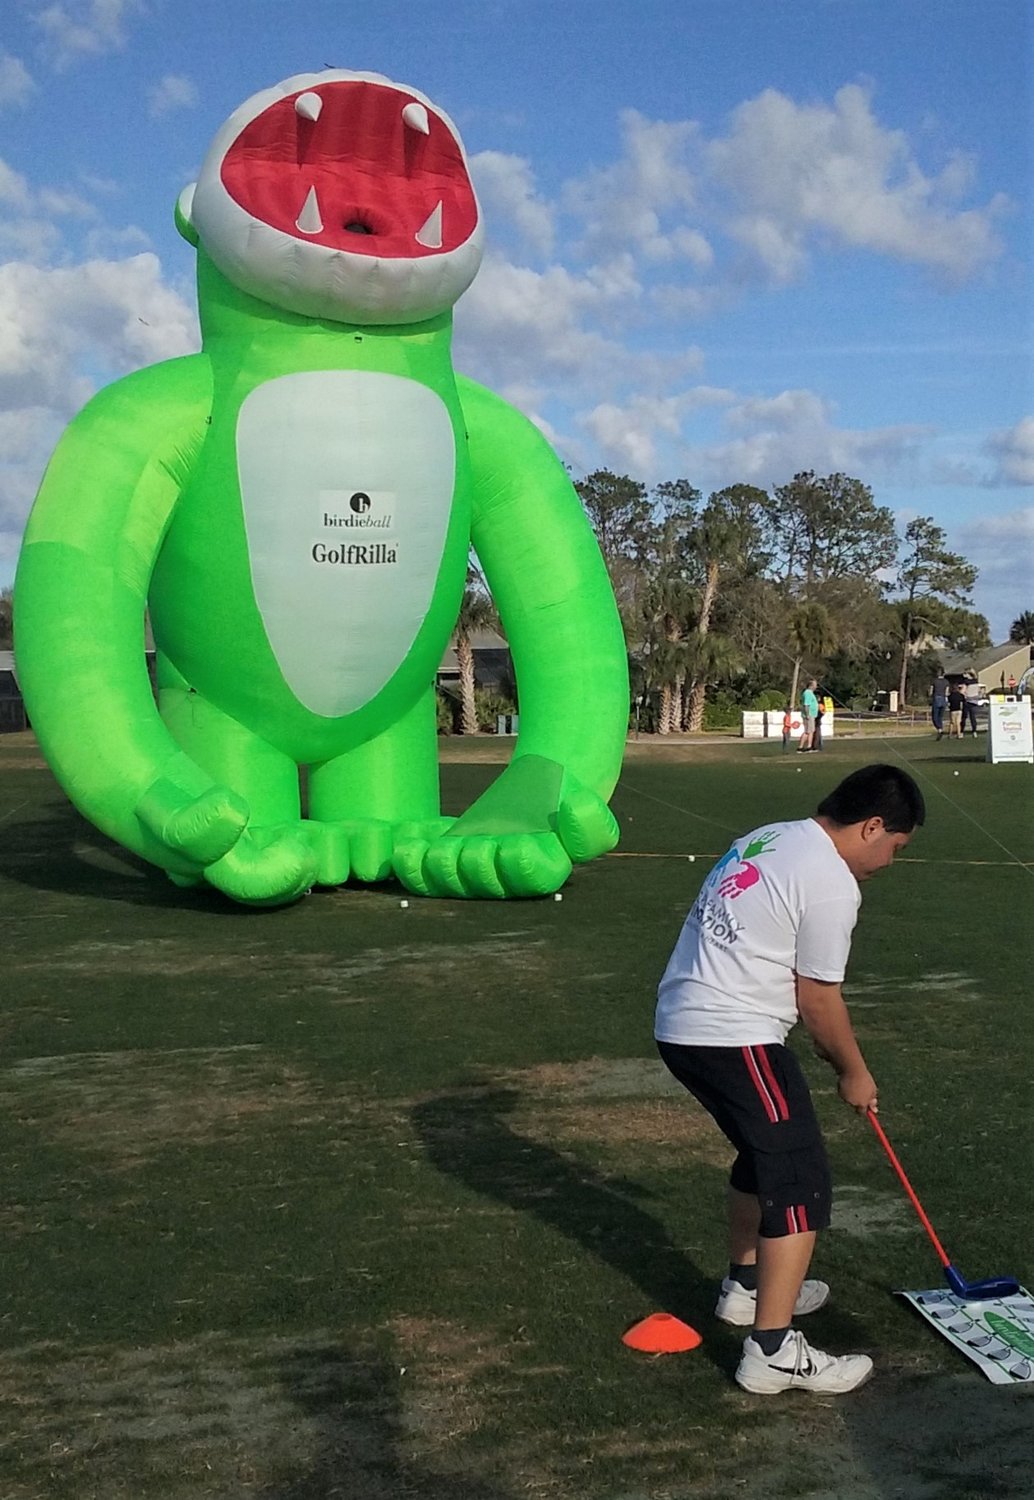 A young golfer attempts to hit a ring-shaped “golf ball” into the mouth of Golfrilla, a large, inflatable, green gorilla.